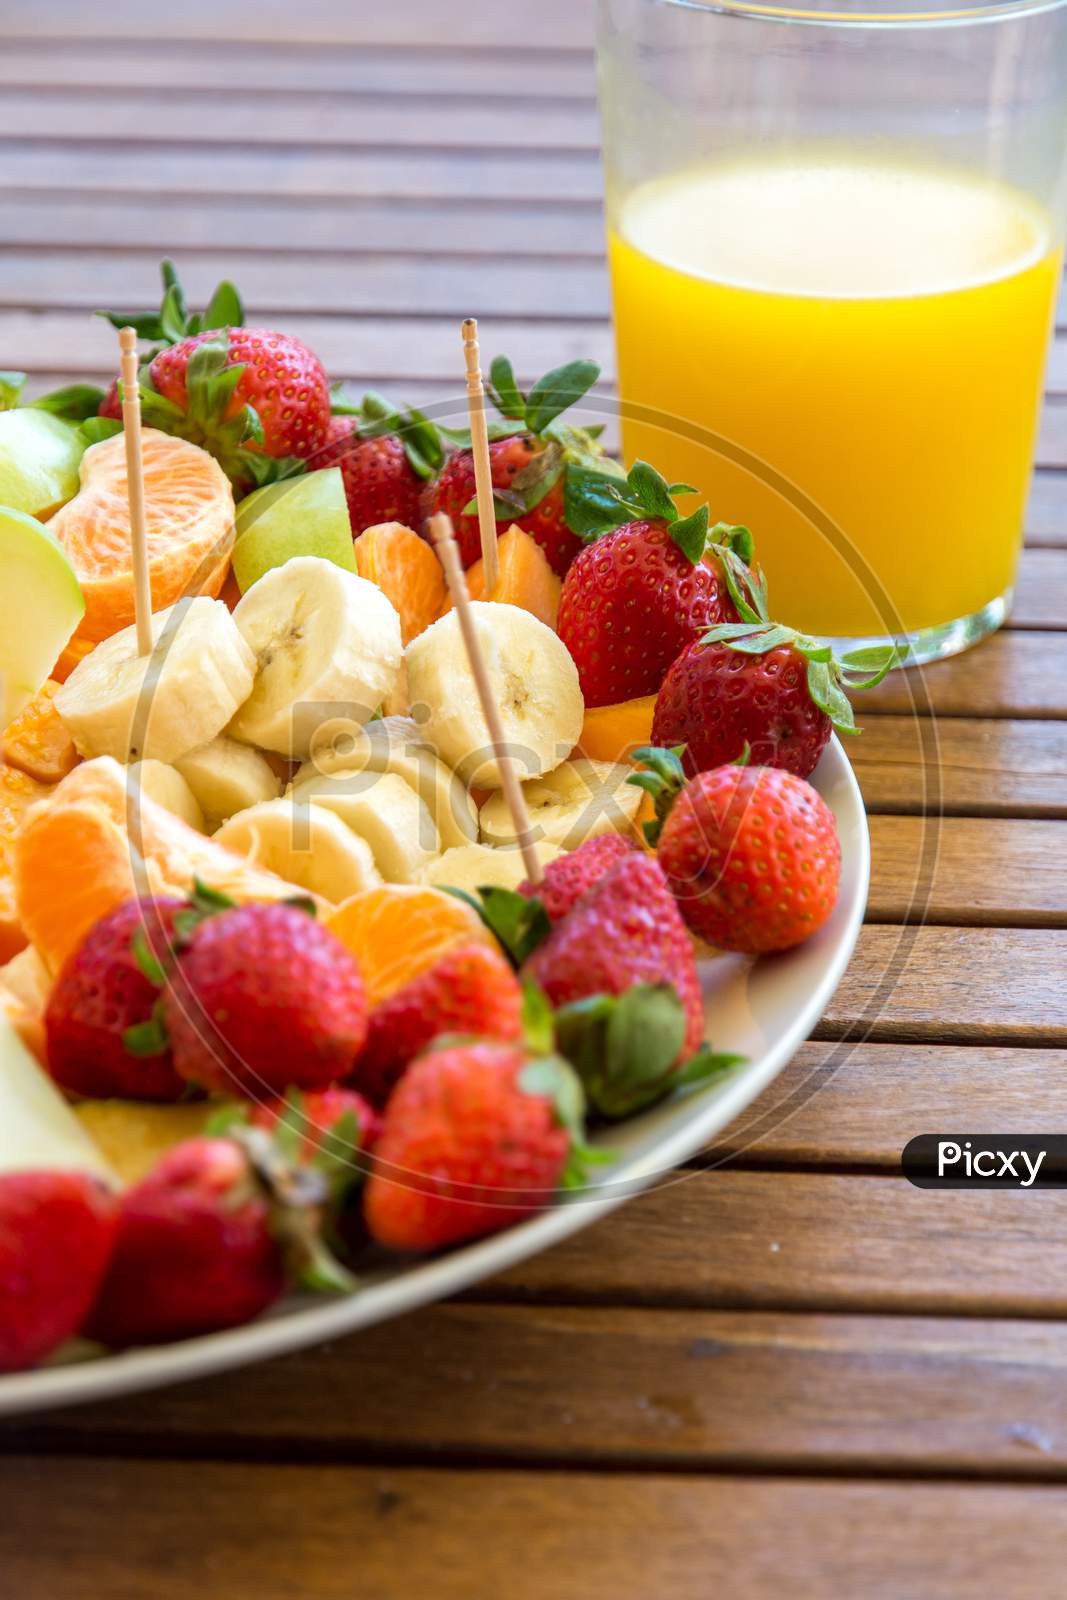 plate with assortment of fruit slices on a wooden table and glass with fresh orange juice healthy eating concept